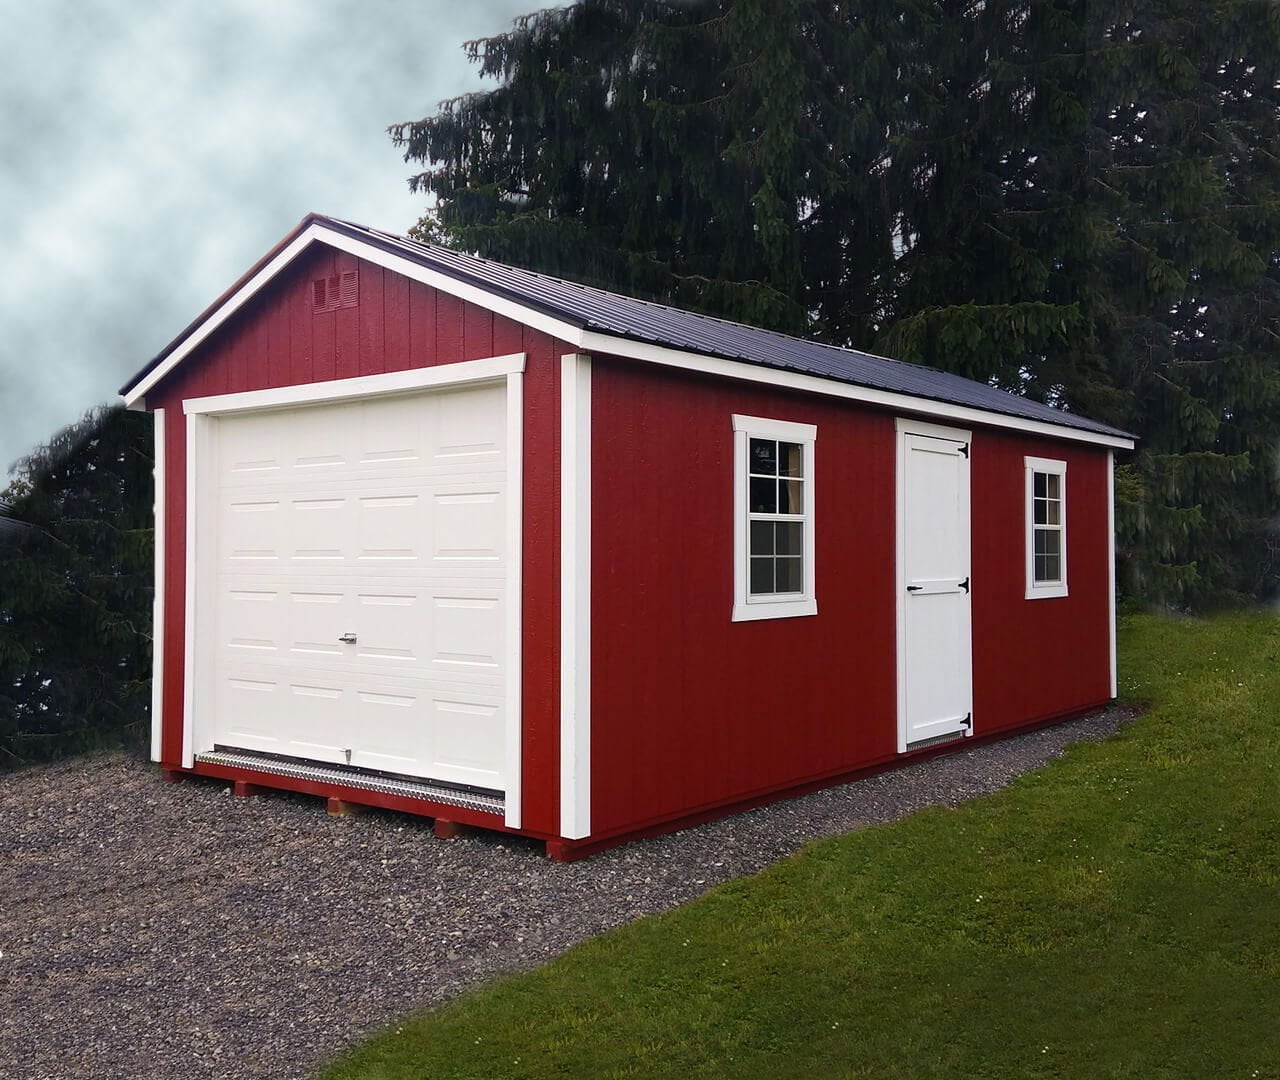 Red shed with white trim in yard